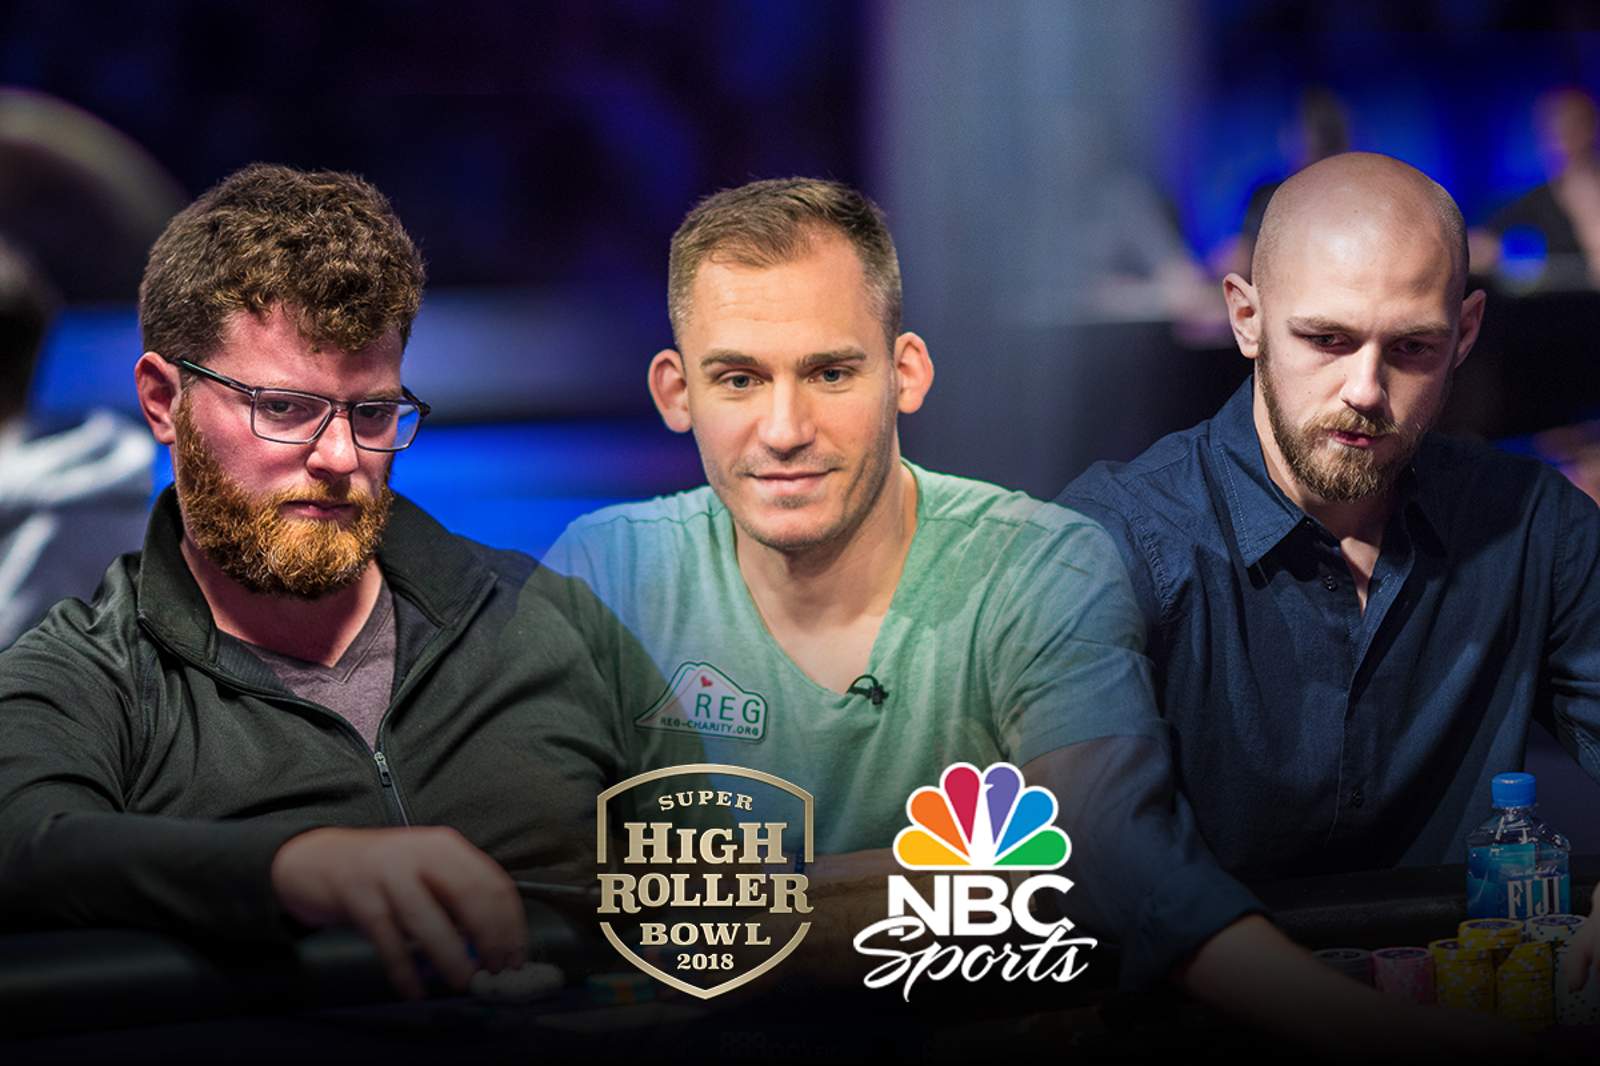 Don’t Miss a Night Filled with Super High Roller Bowl Action on NBC Sports!